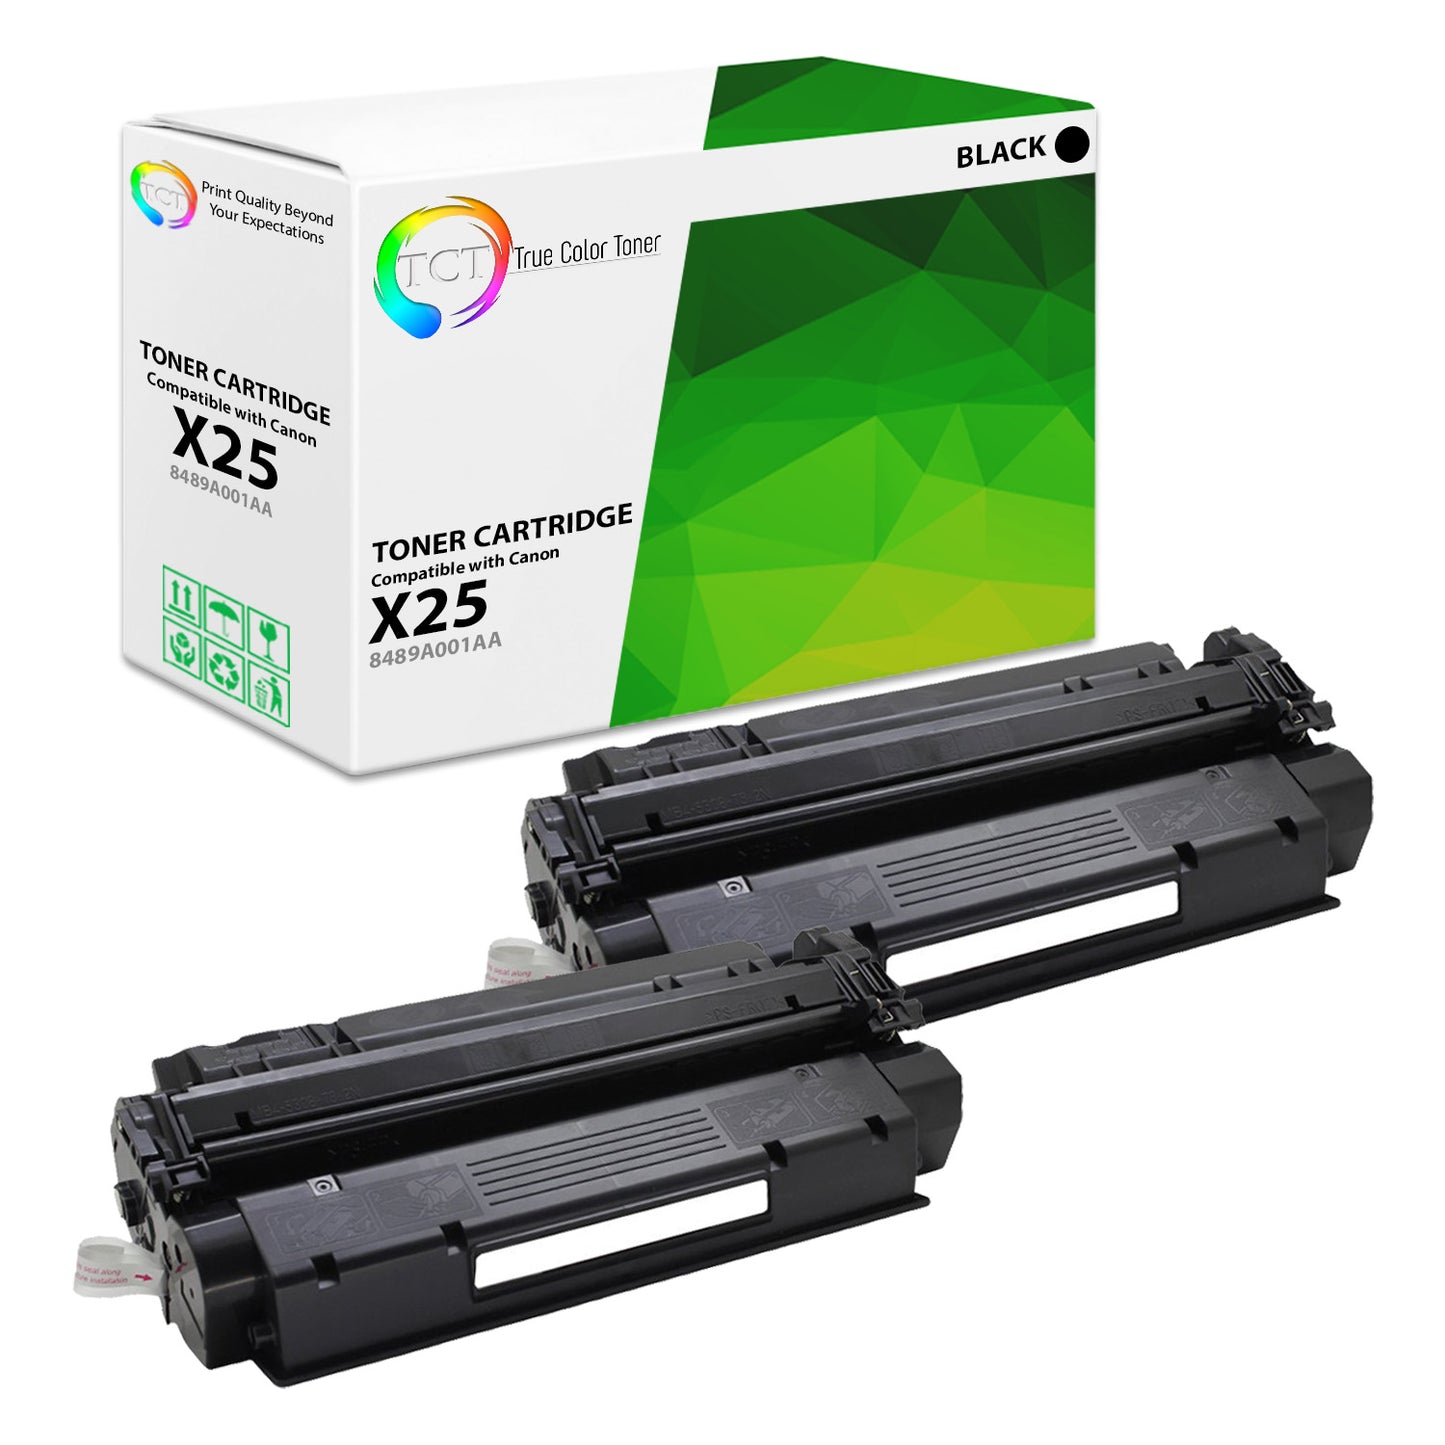 TCT Compatible Toner Cartridge Replacement for the Canon X25 Series - 2 Pack Black